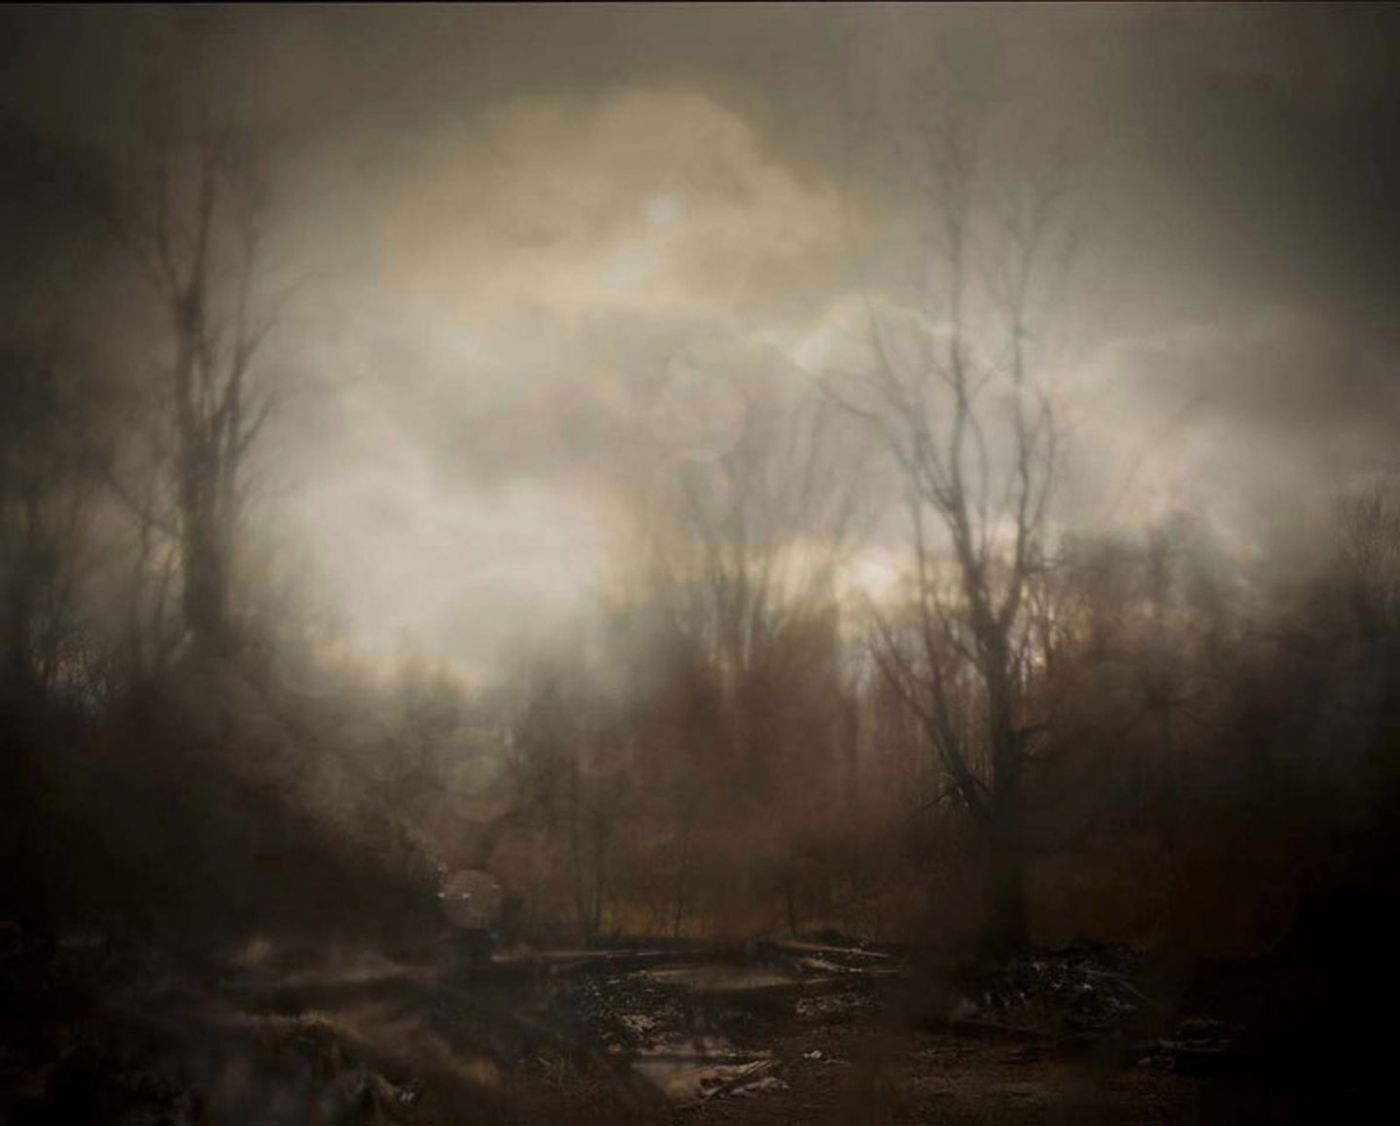 Todd Hido: Excerpts from Silver Meadows, 